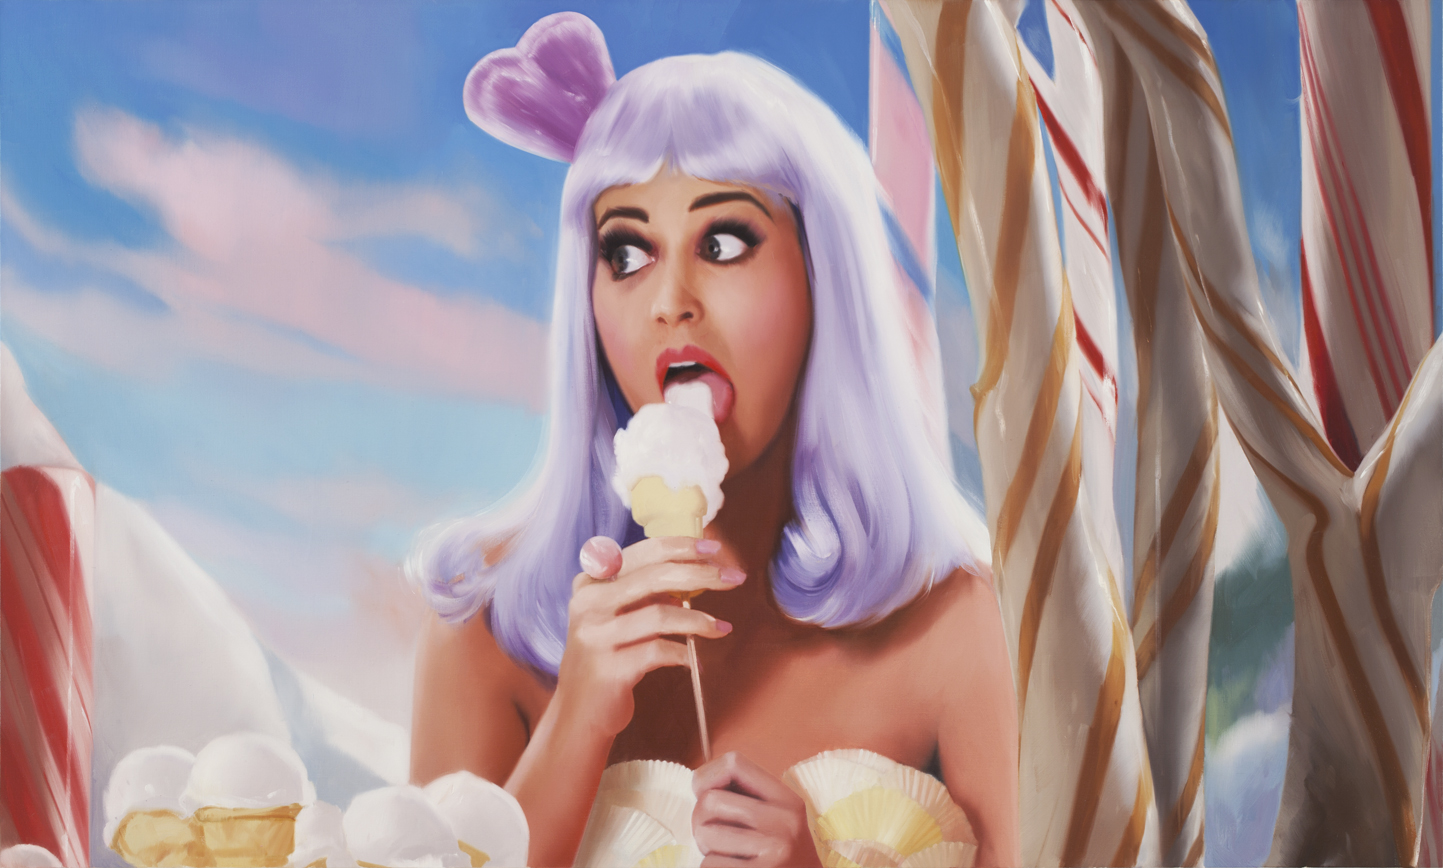 Oil painting of pop singer Katy Perry surrounded by candy.